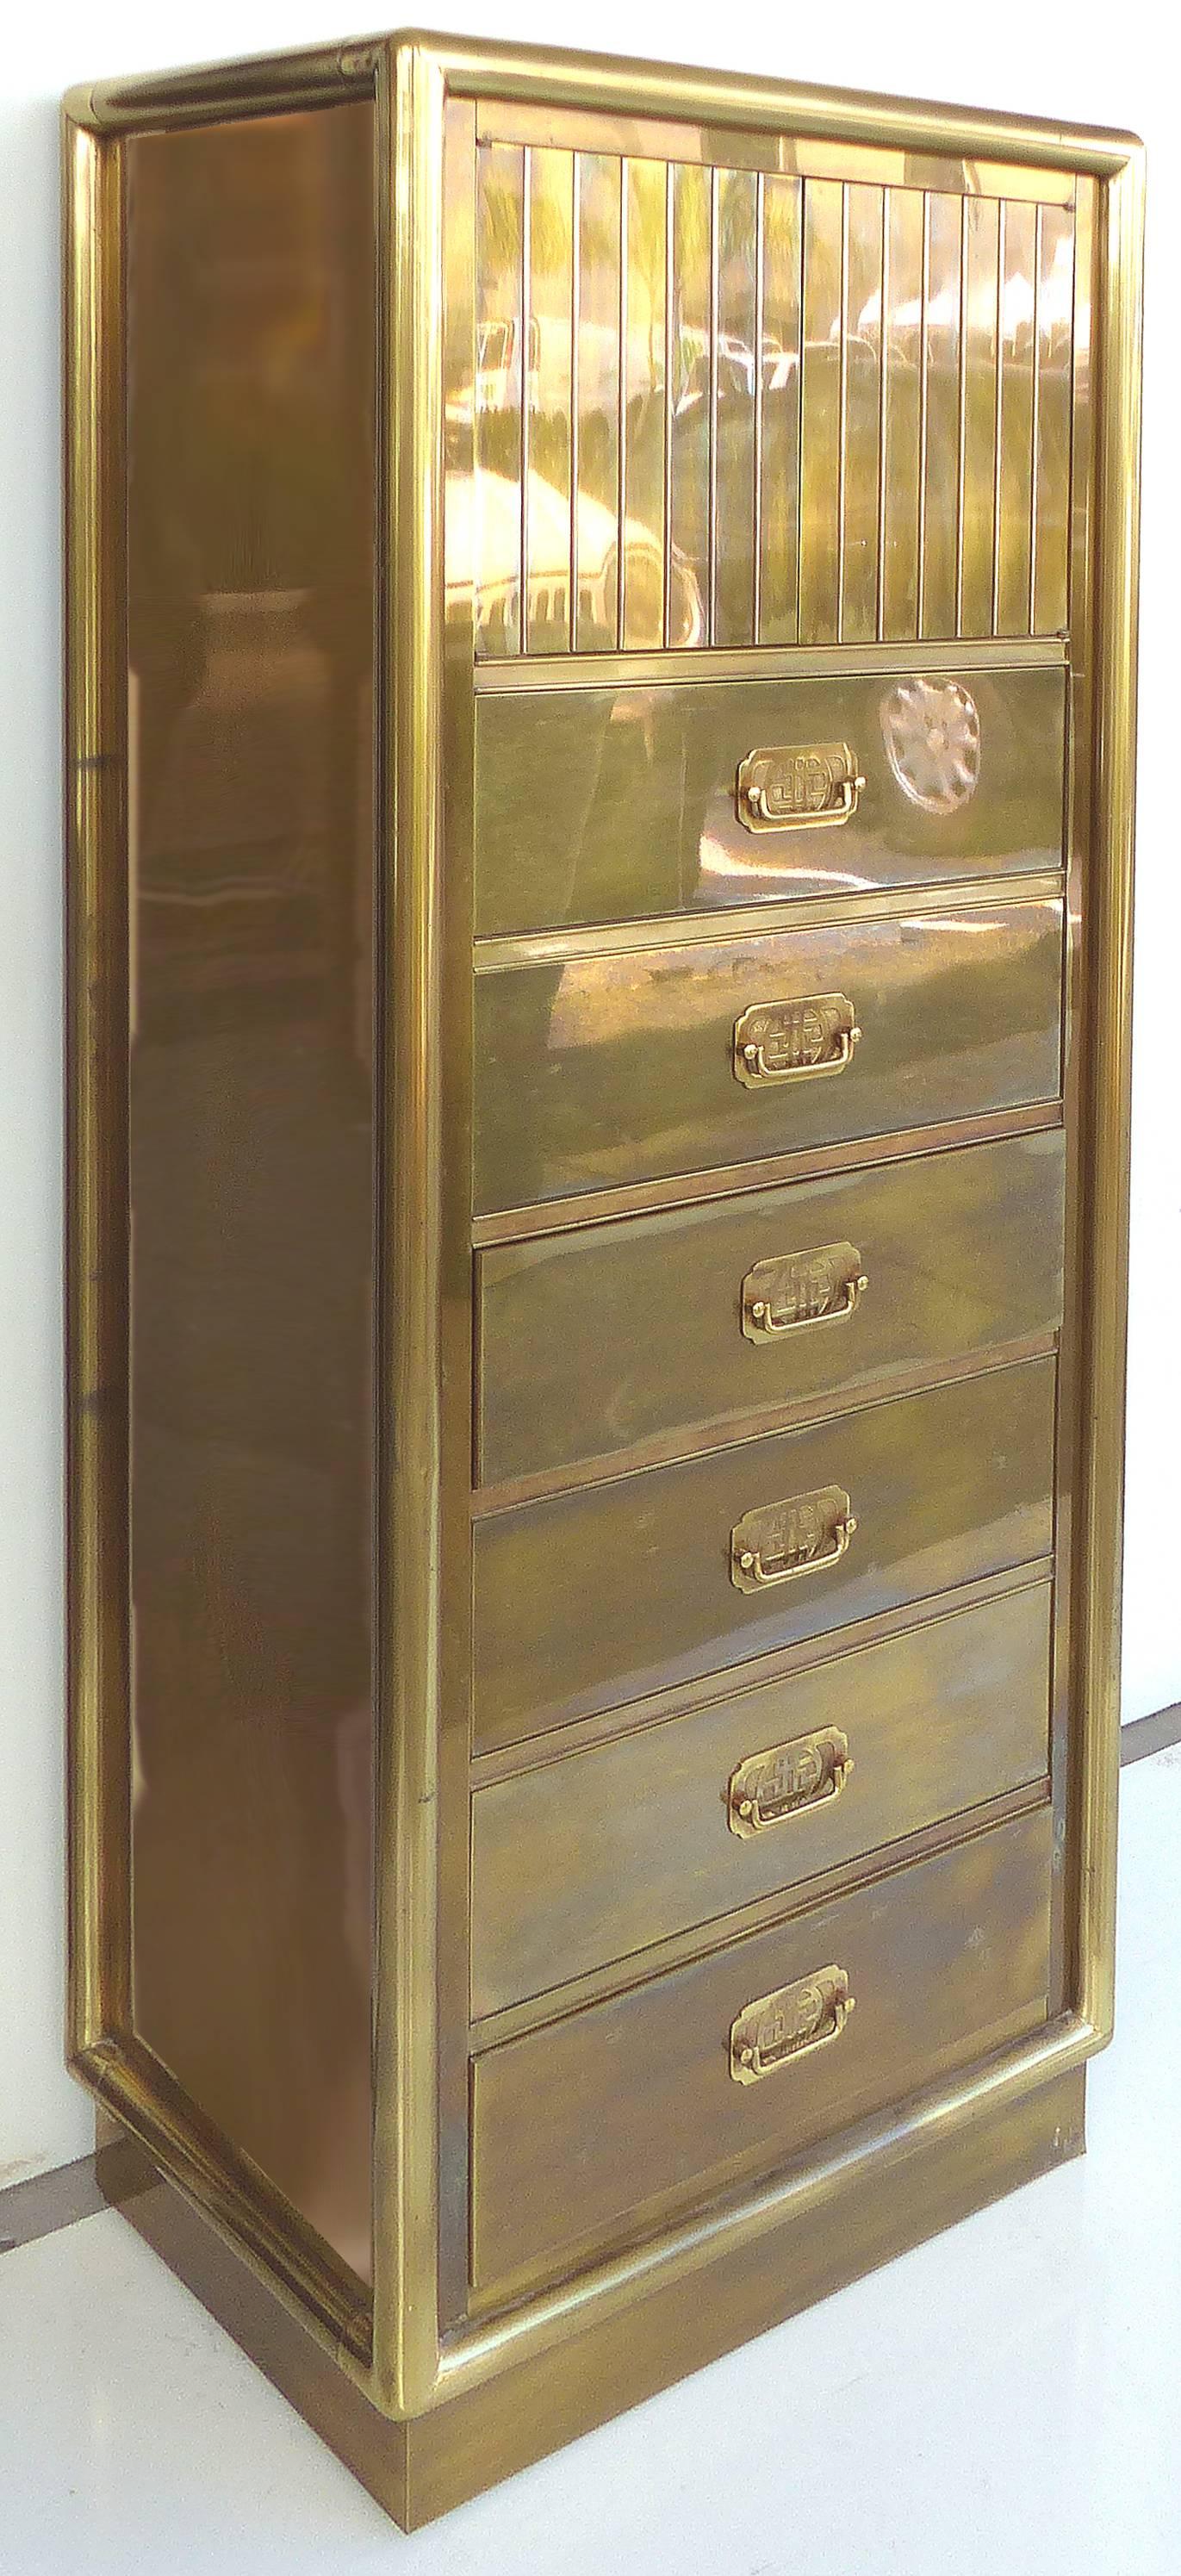 A rare fine quality brass lingerie chest from Mastercraft with six drawers below and two latch release doors above. The two upper doors open to reveal three lined drawers with sectioned compartments. The lower drawers have Asian motif hardware. The